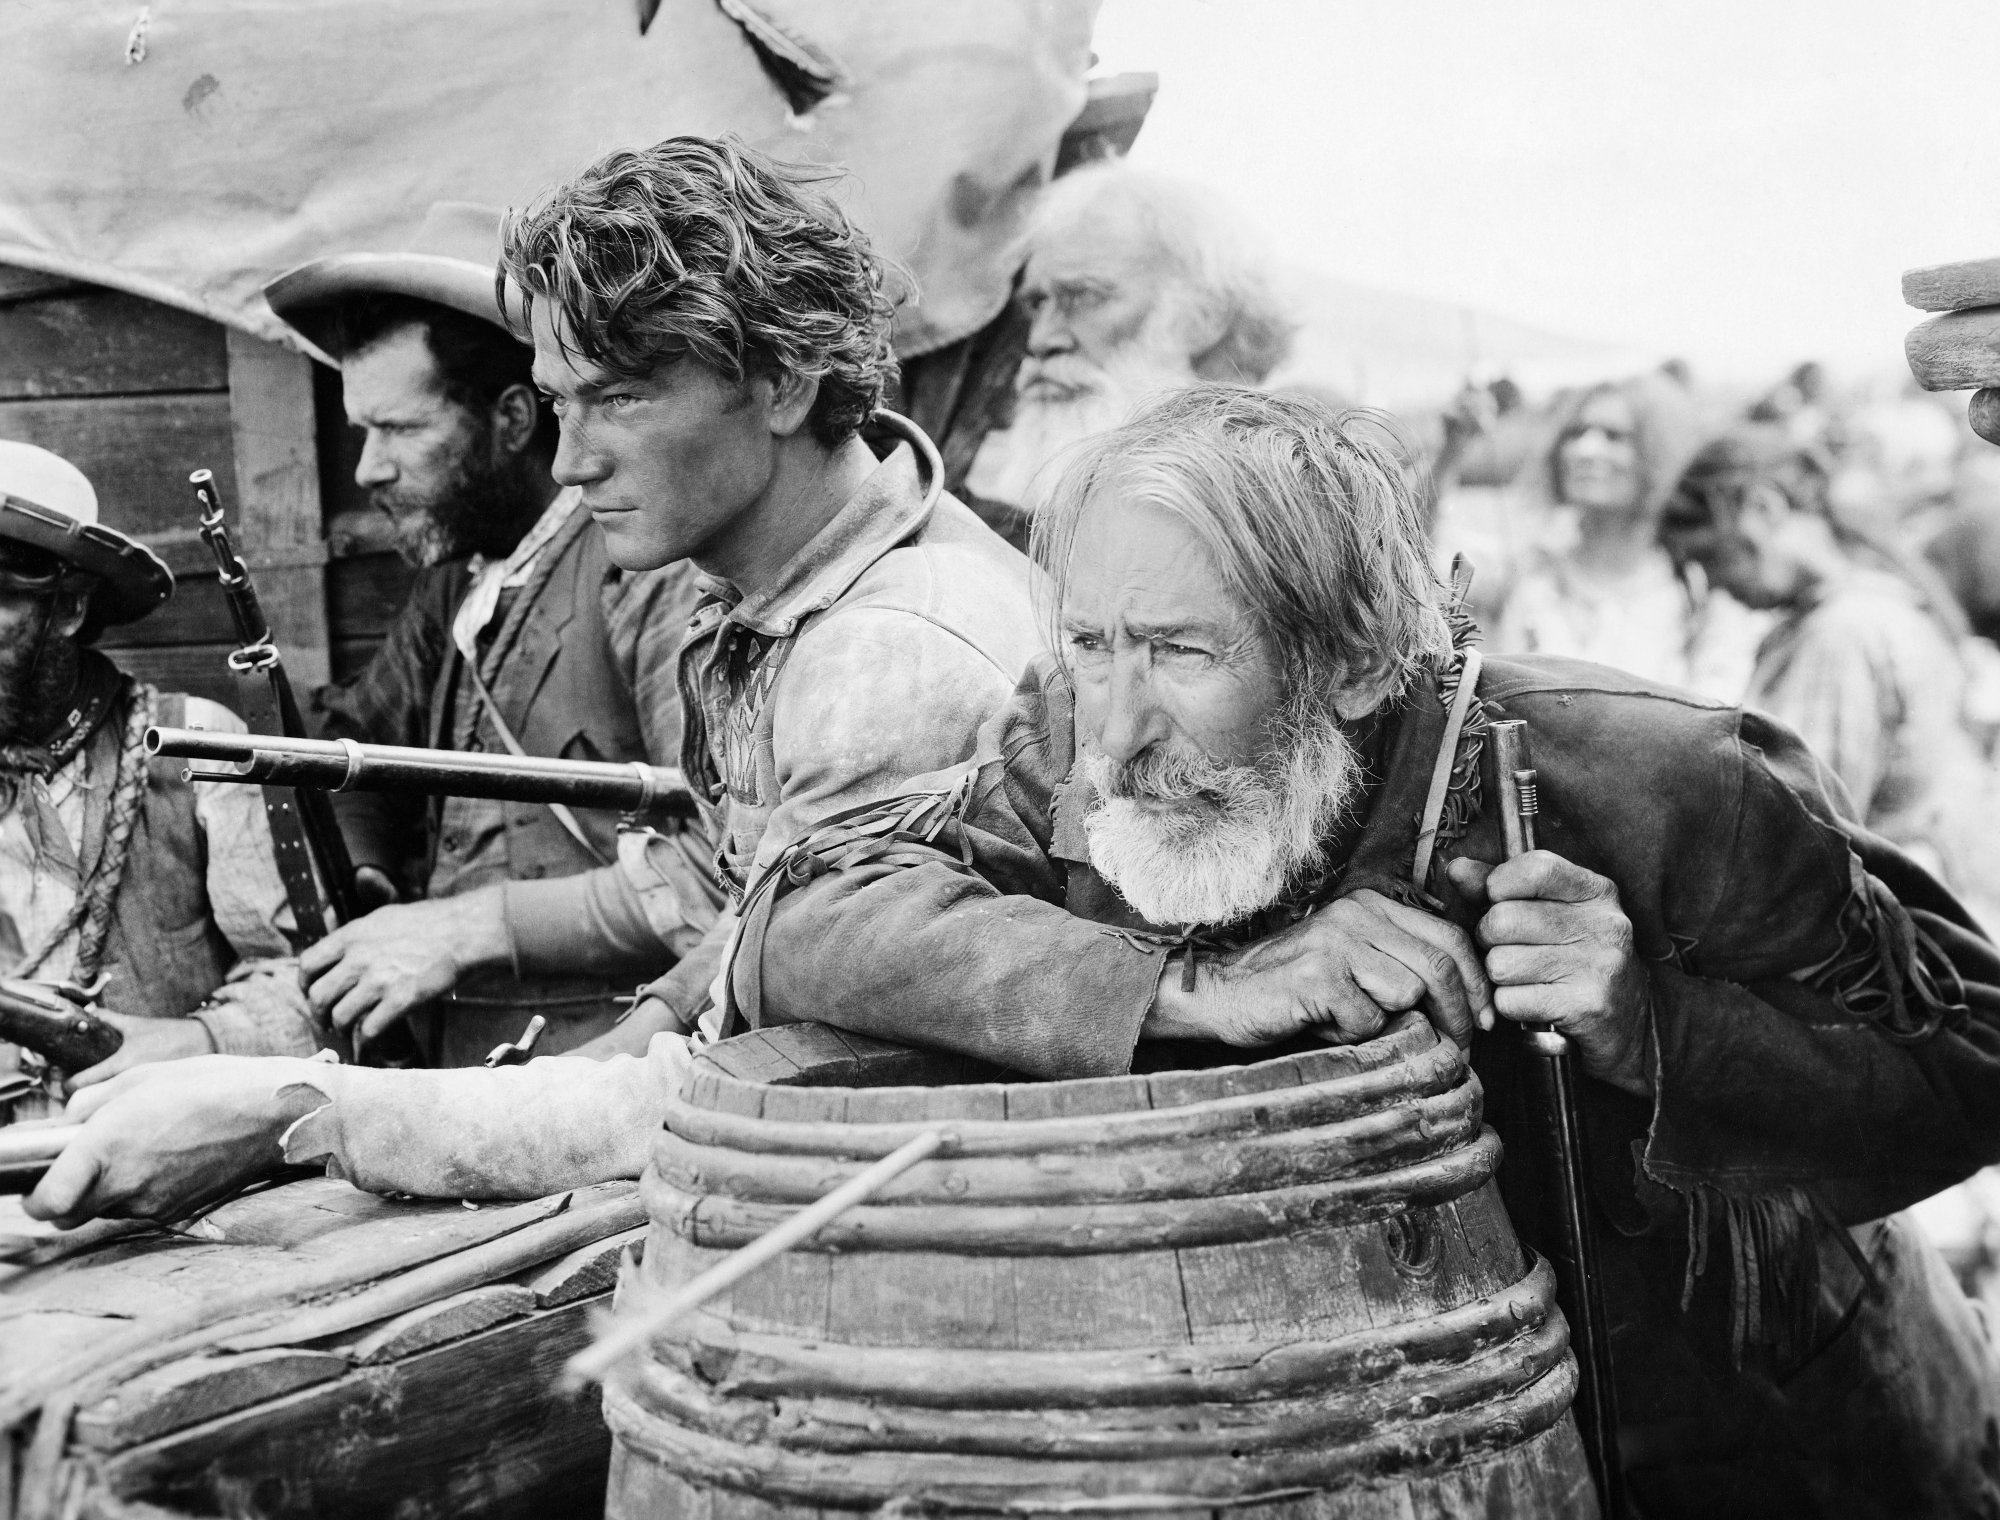 'The Big Trail' John Wayne Breck Coleman and Tully Marshall as Zeke on movie set. Black-and-white photo of Wayne and Marshall crouching behind barrels with guns.